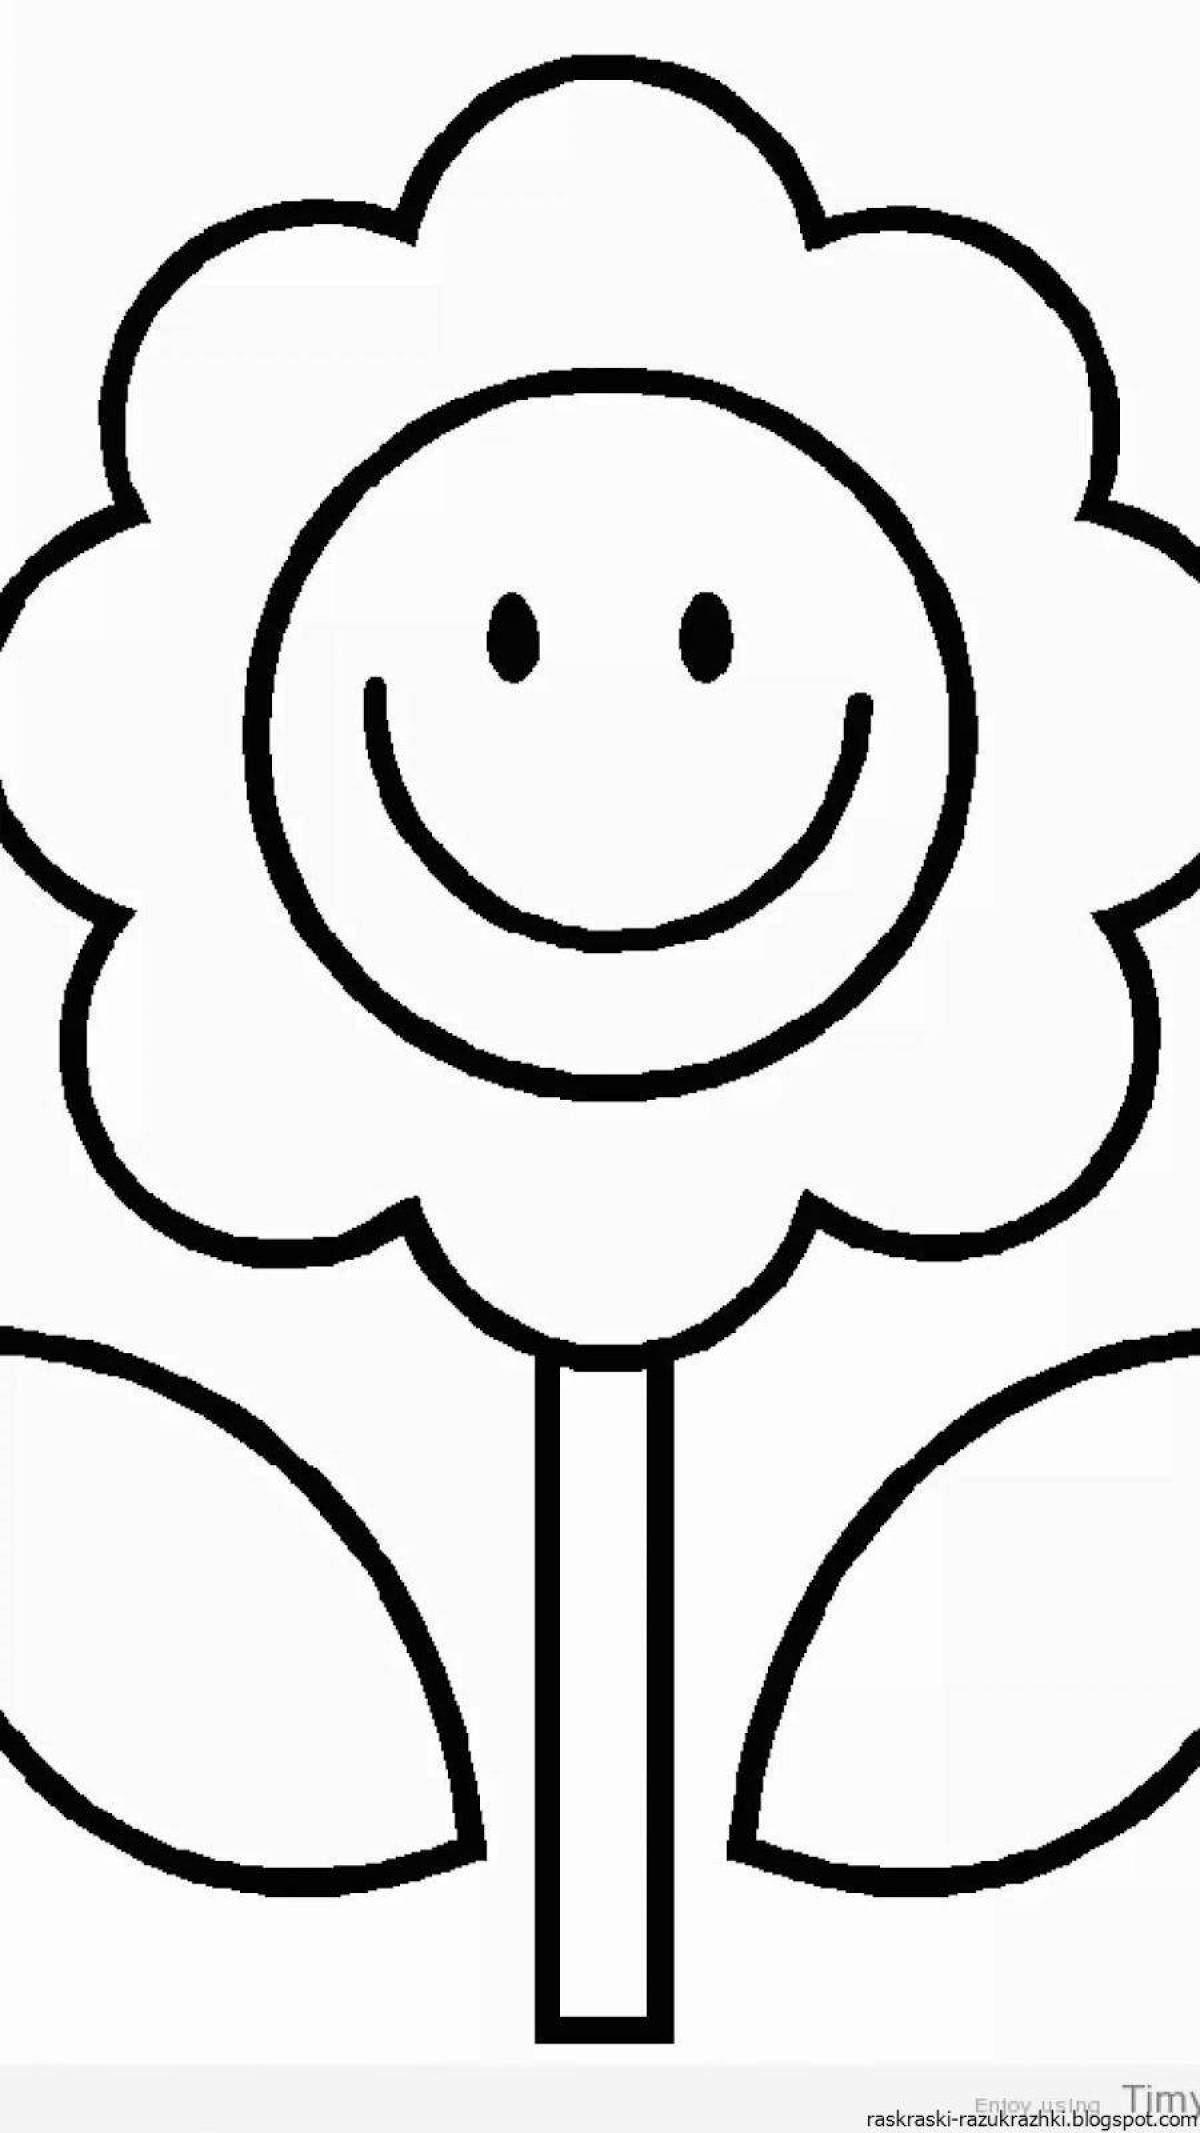 Amazing simple coloring book for kids